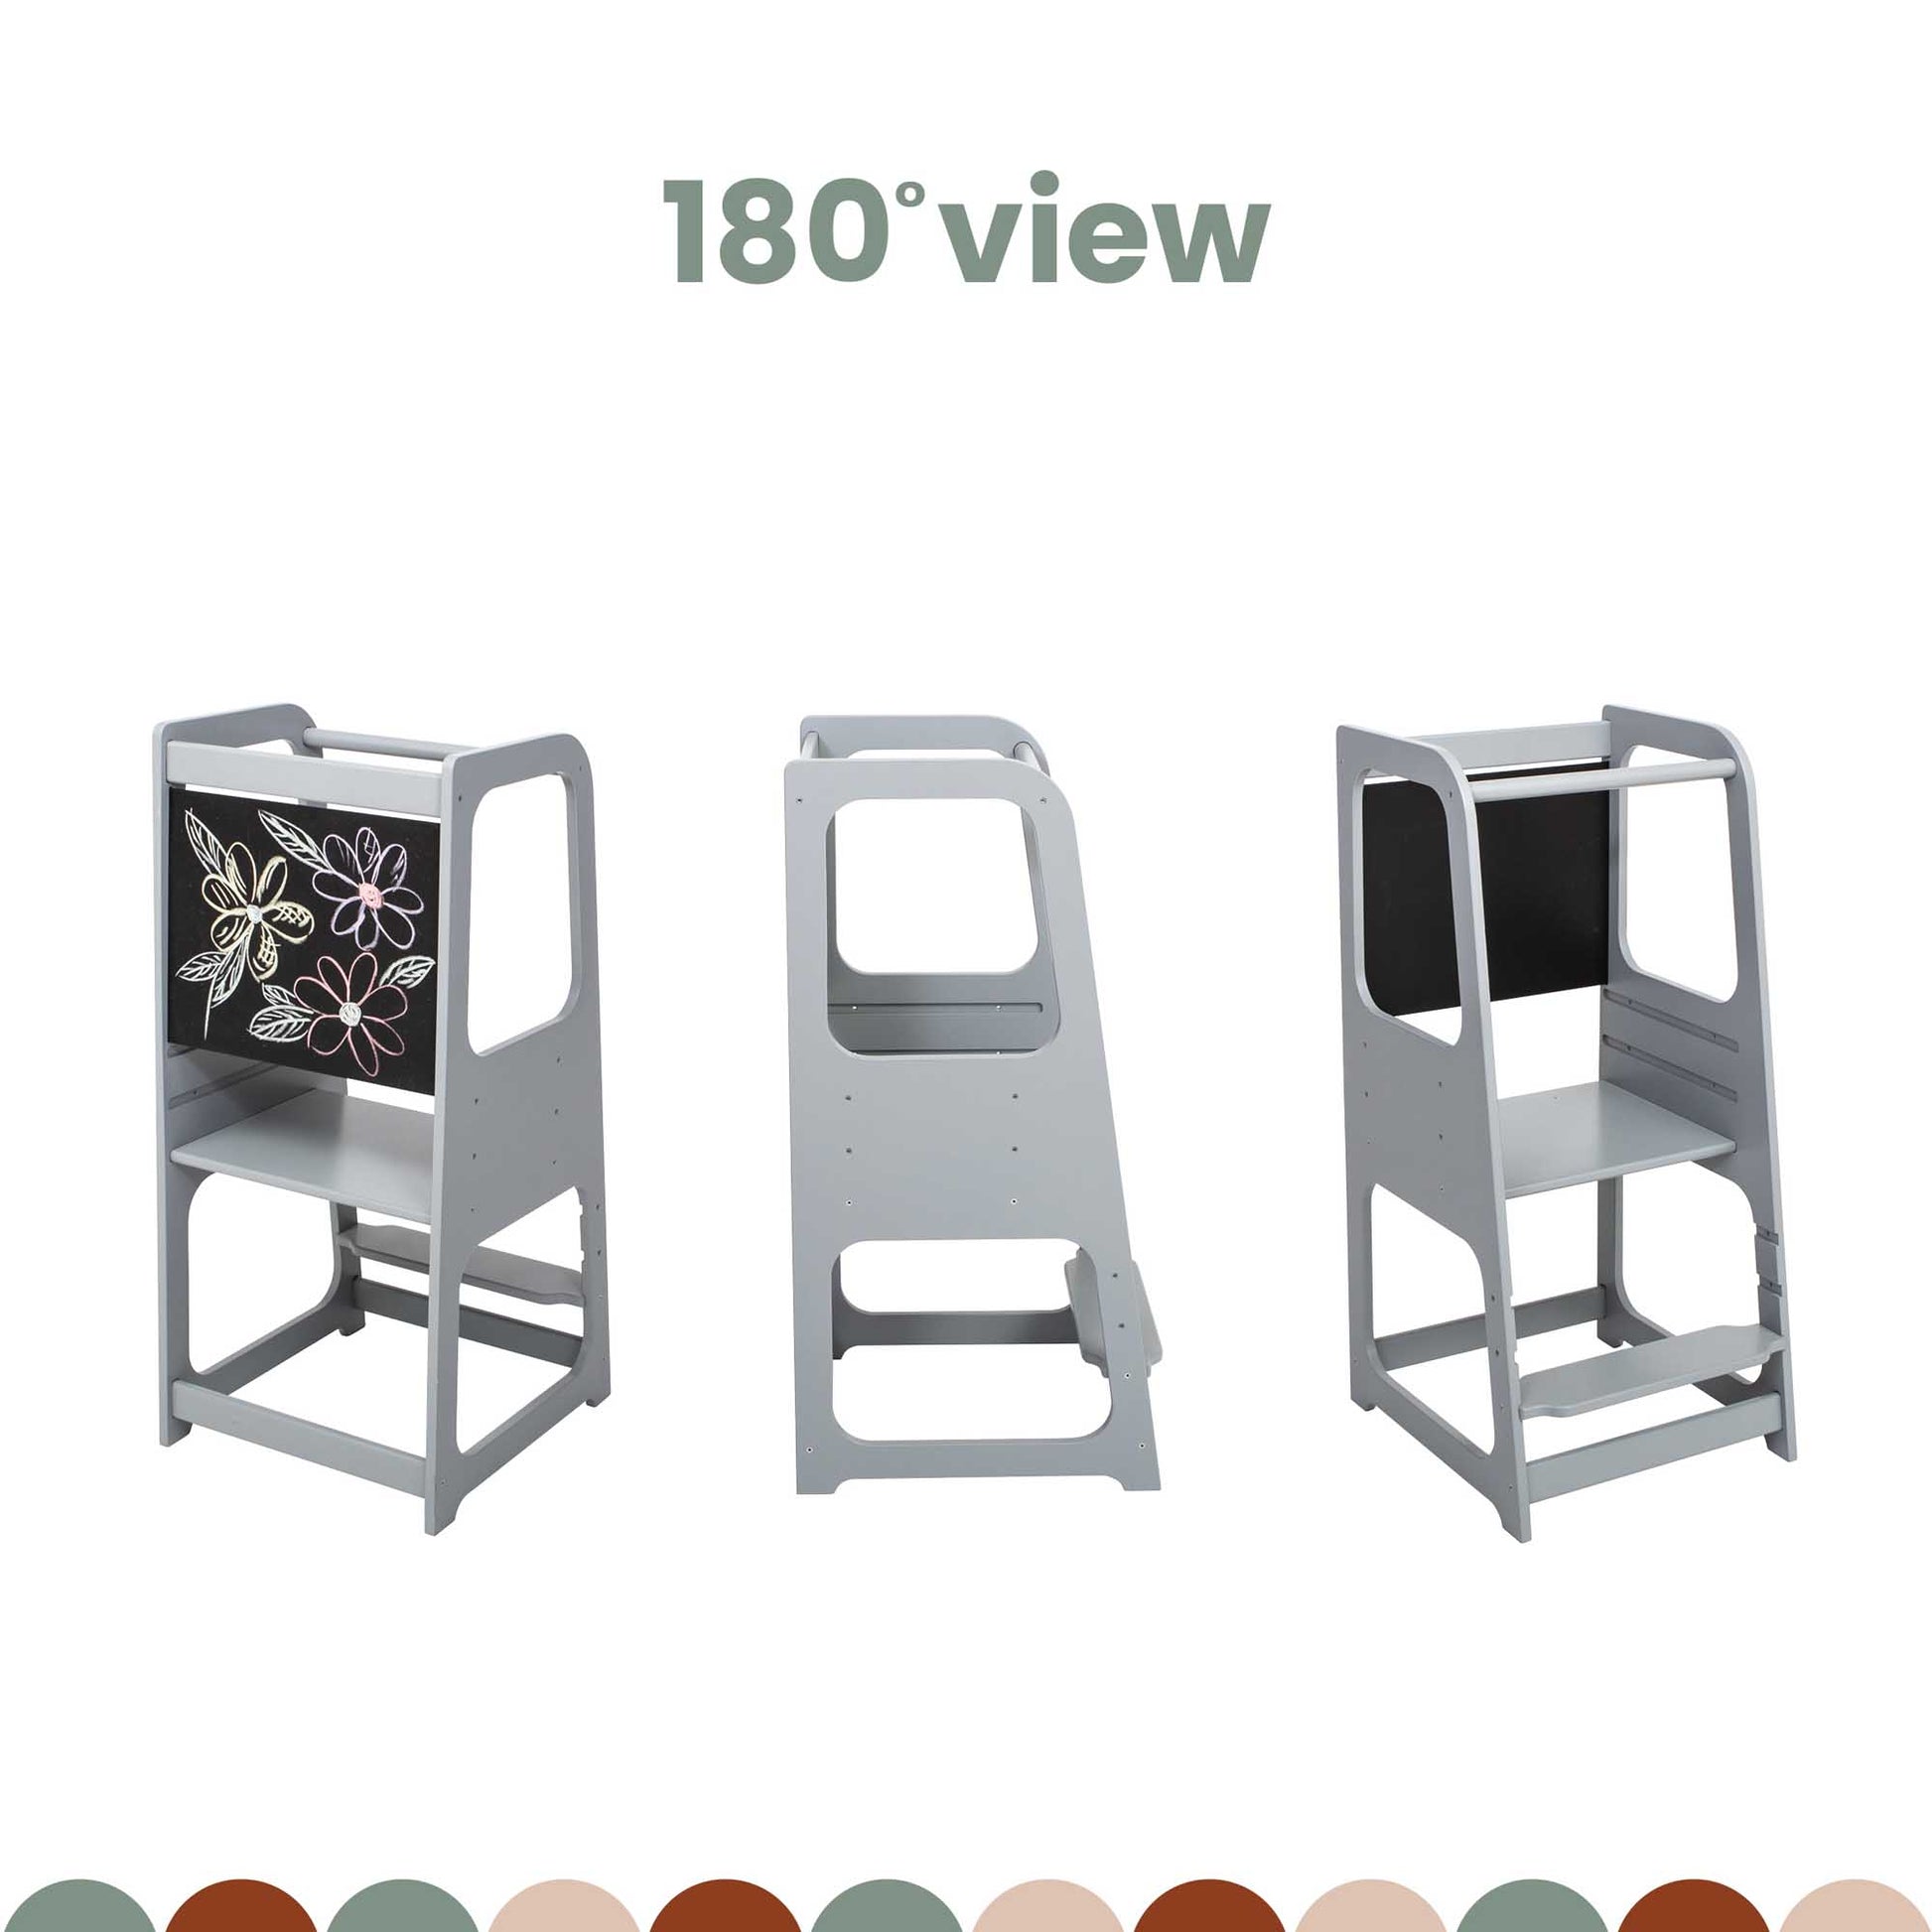 Collage featuring three views of a kitchen tower step stool, showcasing its versatility and design from various angles.